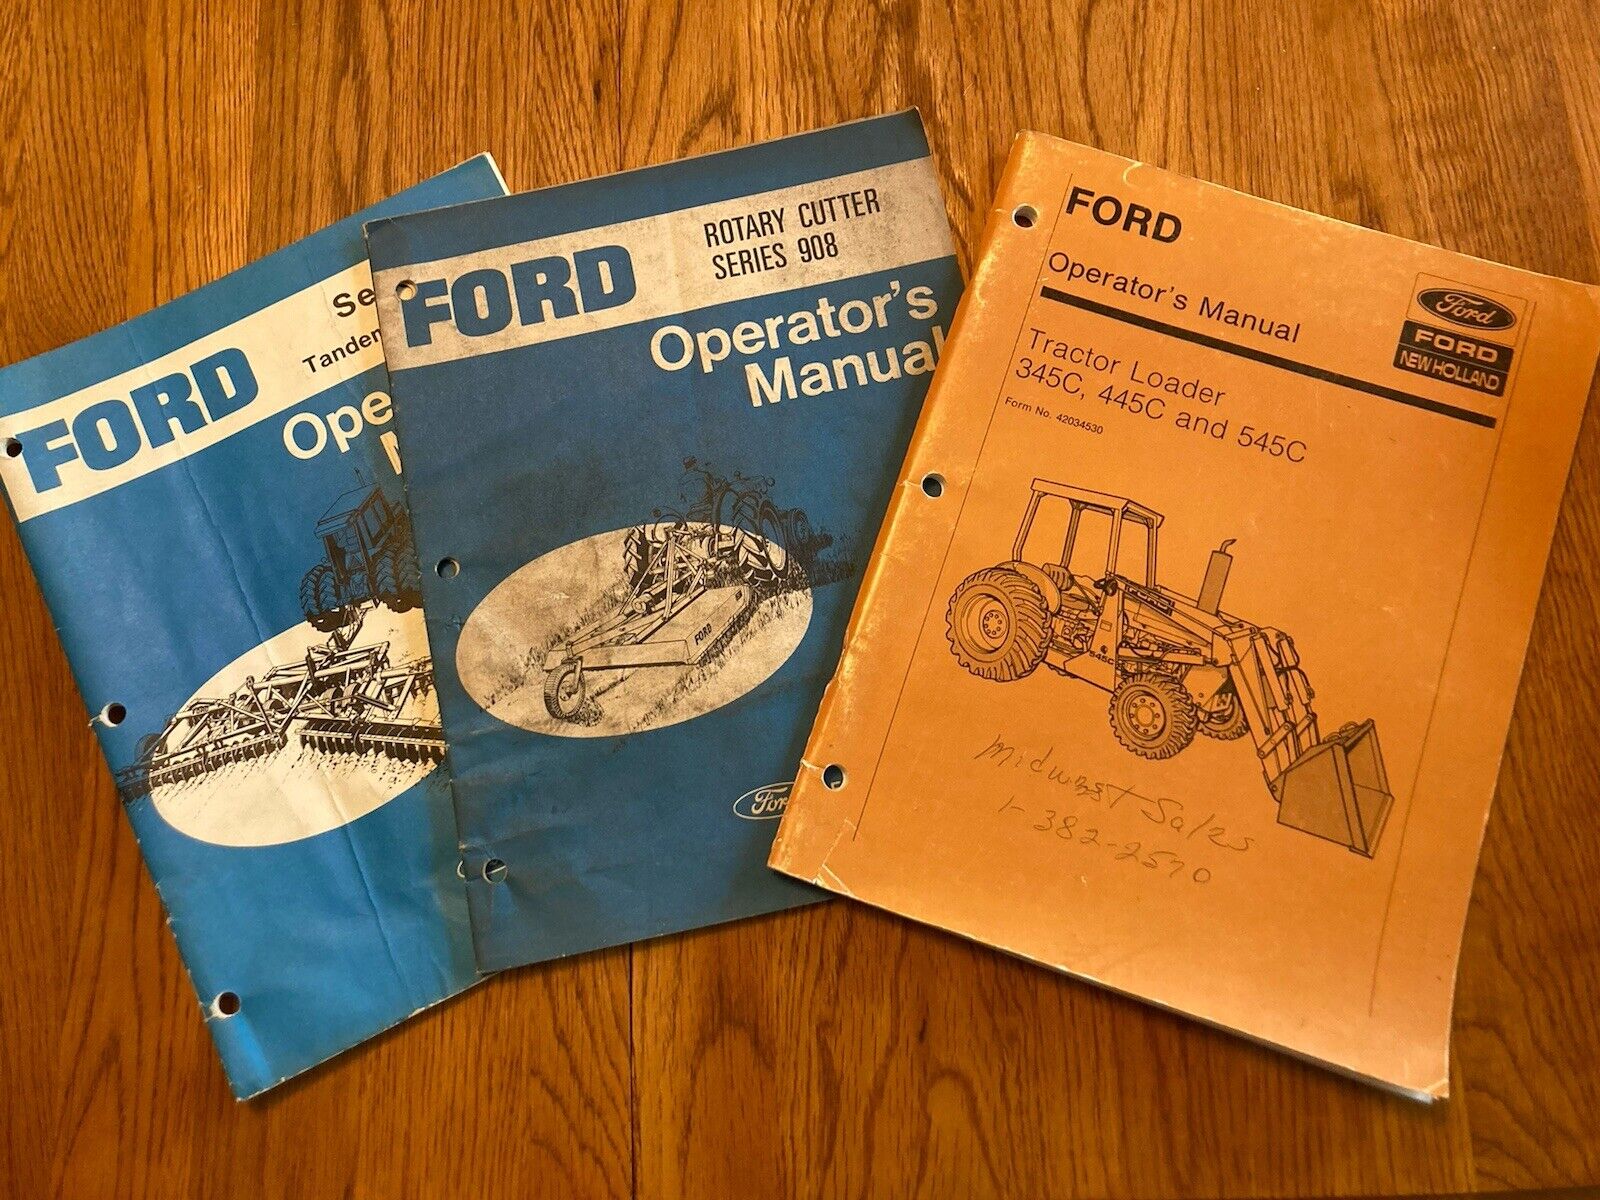 Vintage Ford New Holland Tractor And Equipment Operator’s Manuel’s.